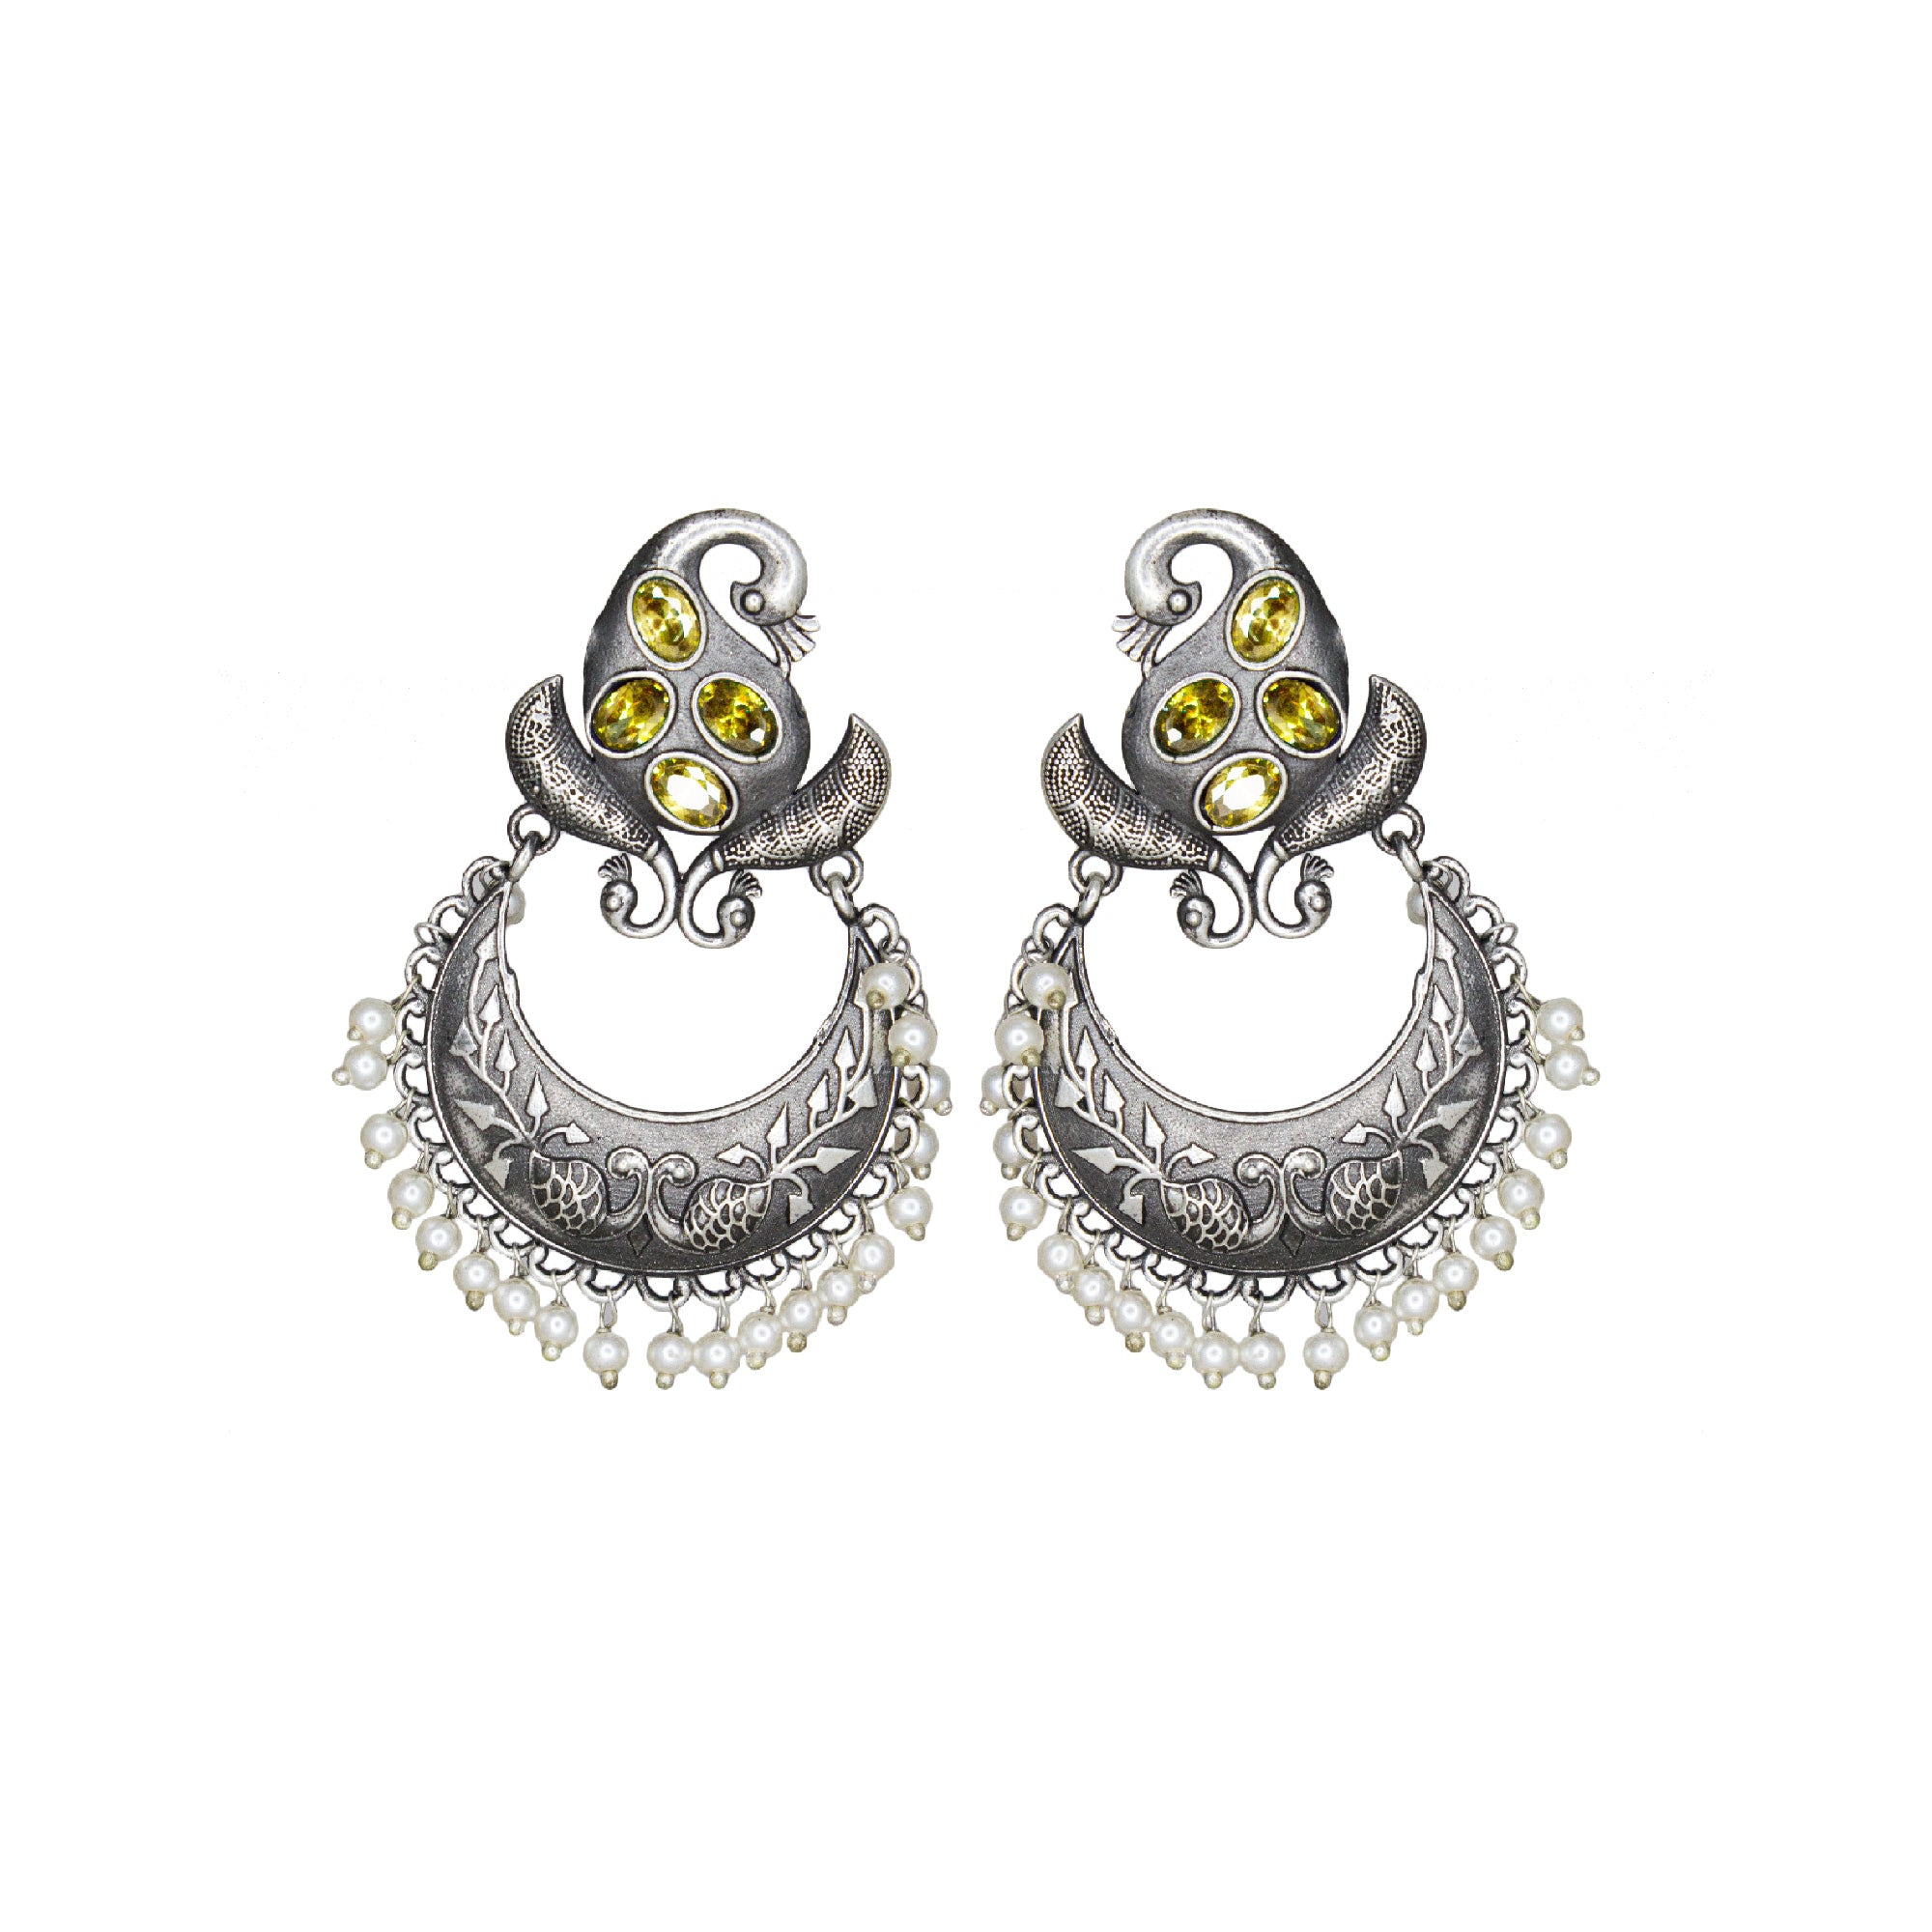 Abhinn Silver Replica Peacock Design Studs With Green CZ Stones Studded Earrings for Women